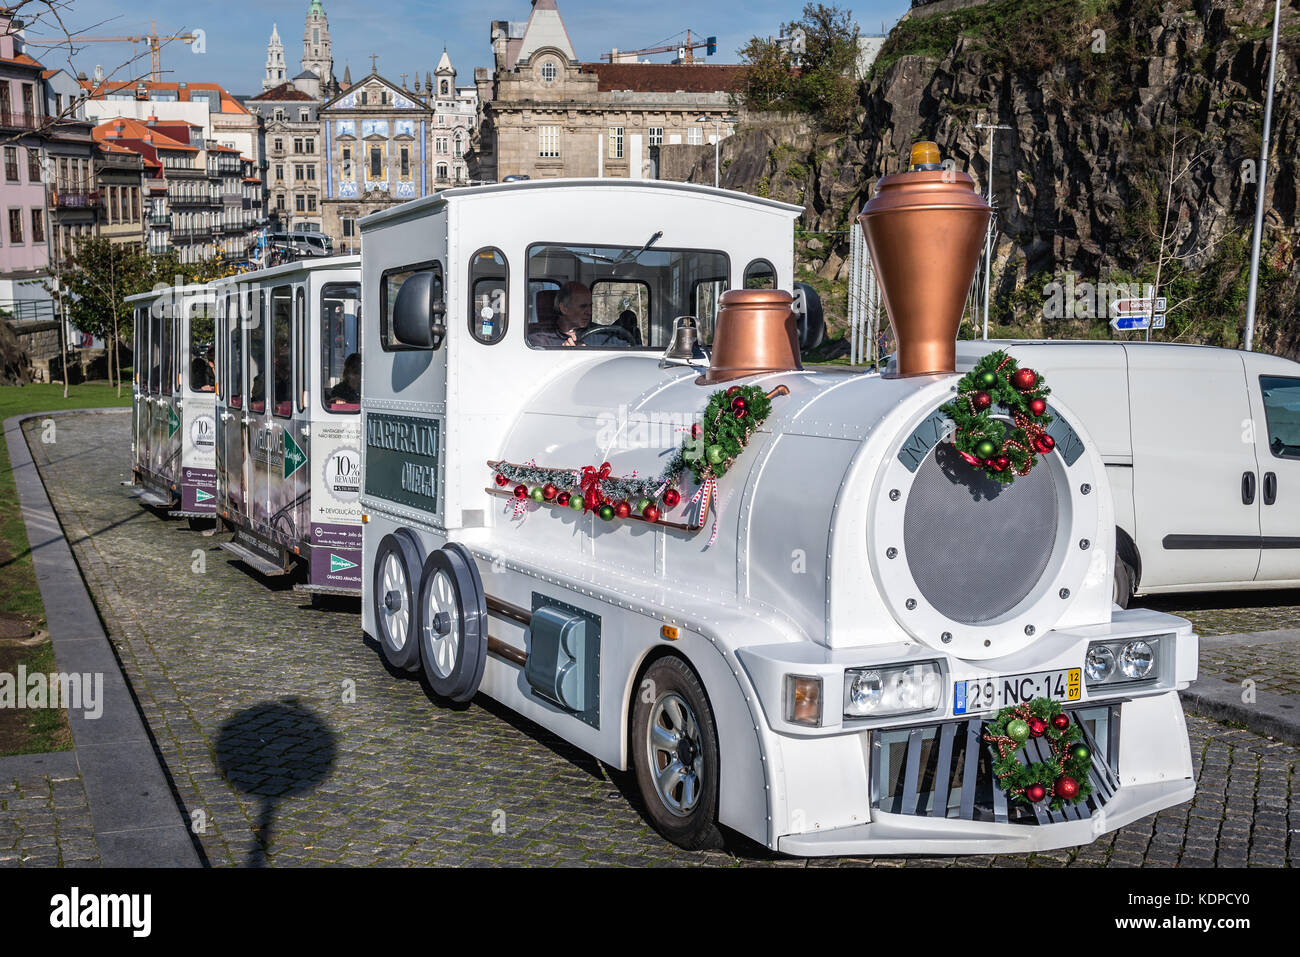 City Sightseeing Tourist Train on Dom Afonso Henriques avenue in Porto city on Iberian Peninsula, second largest city in Portugal Stock Photo